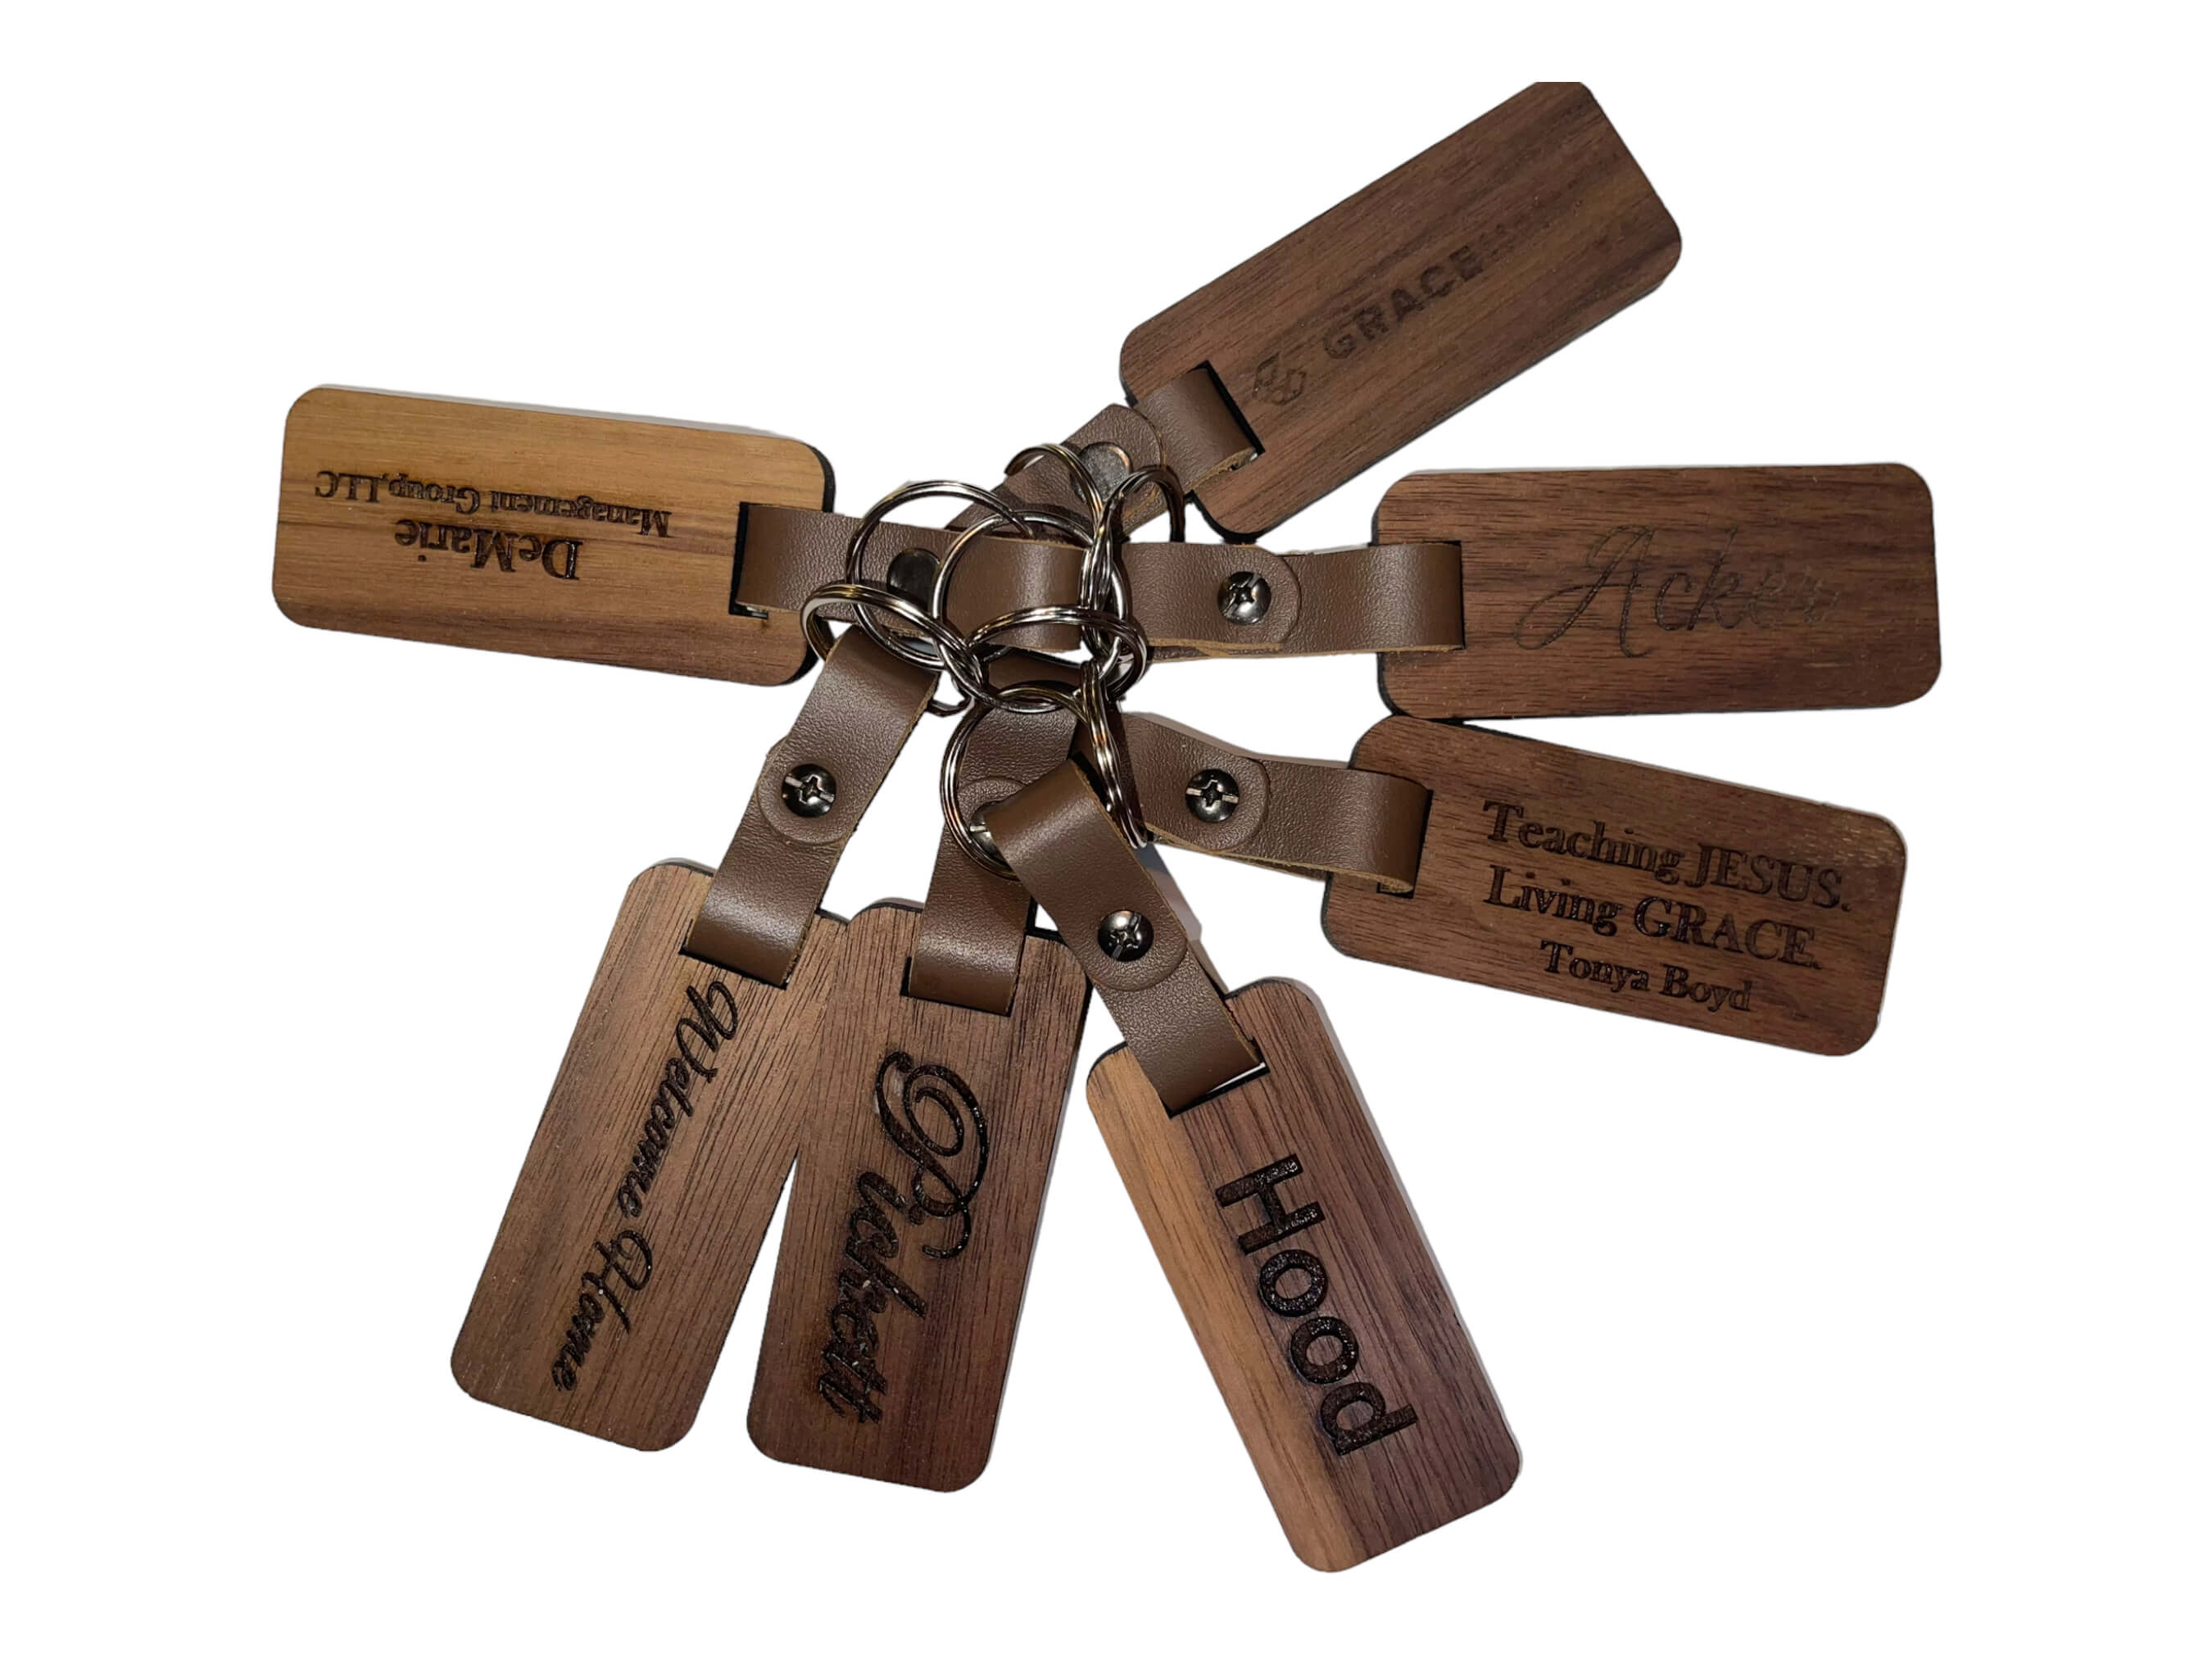 Another photo of the walnut keyrings, showing a few of the design ideas for our laser engraved walnut keyrings. See more at SawyerCustomCrafts.Com